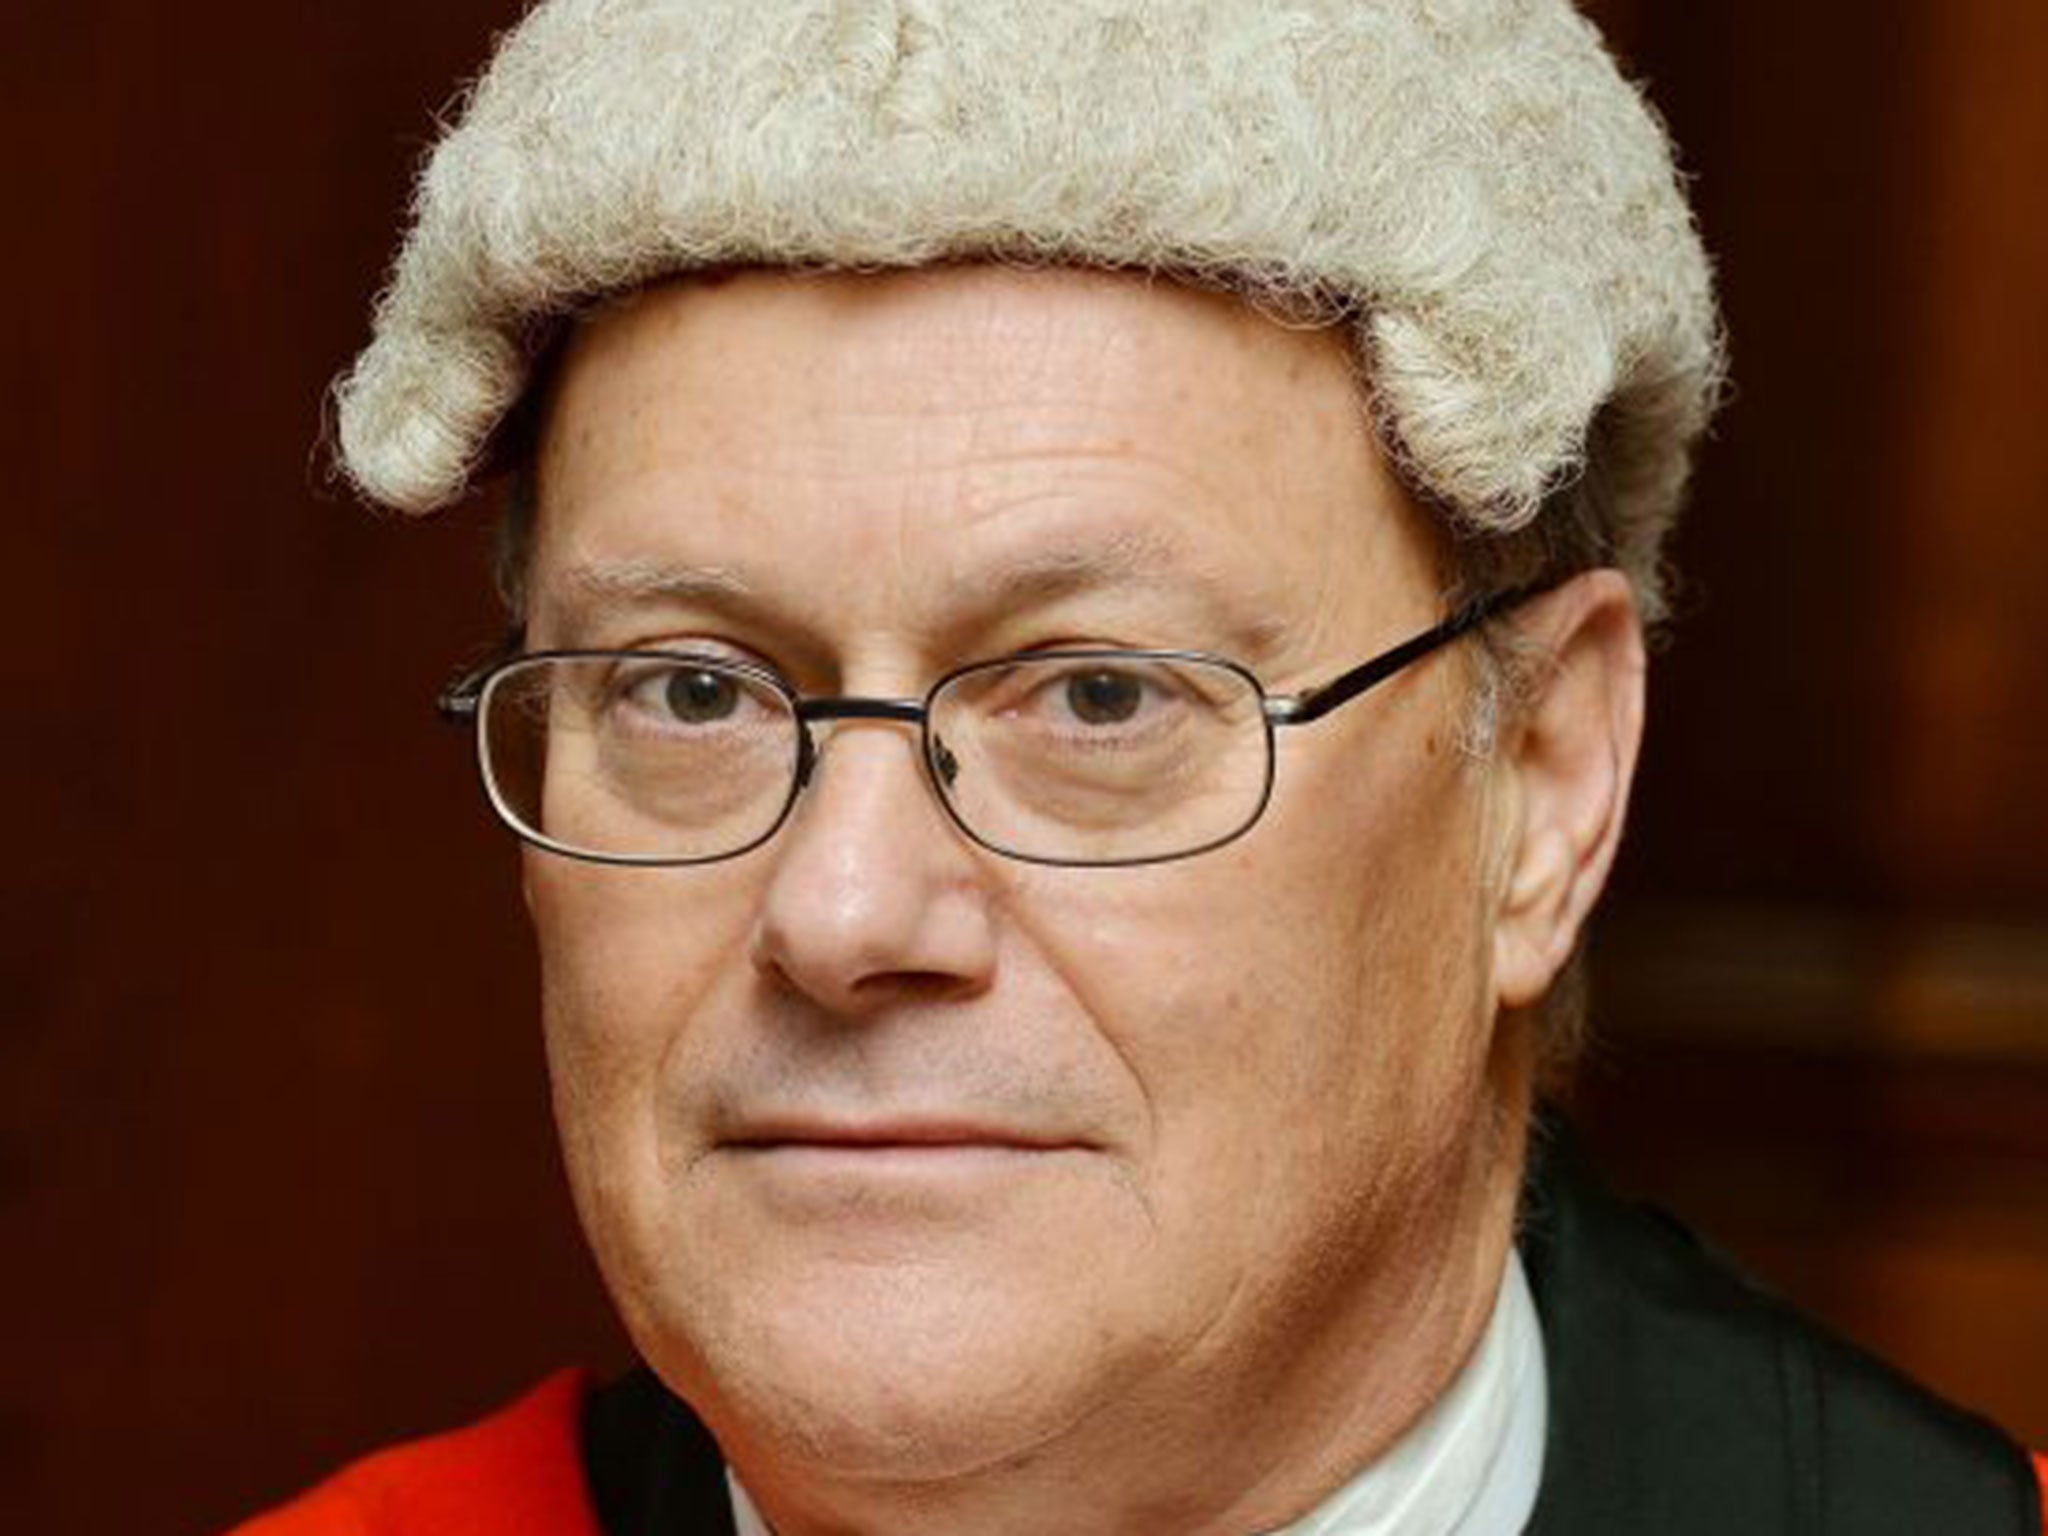 Mr Justice Saunders’ criticism of the Prime Minister centred on a “full and frank” public apology from Mr Cameron